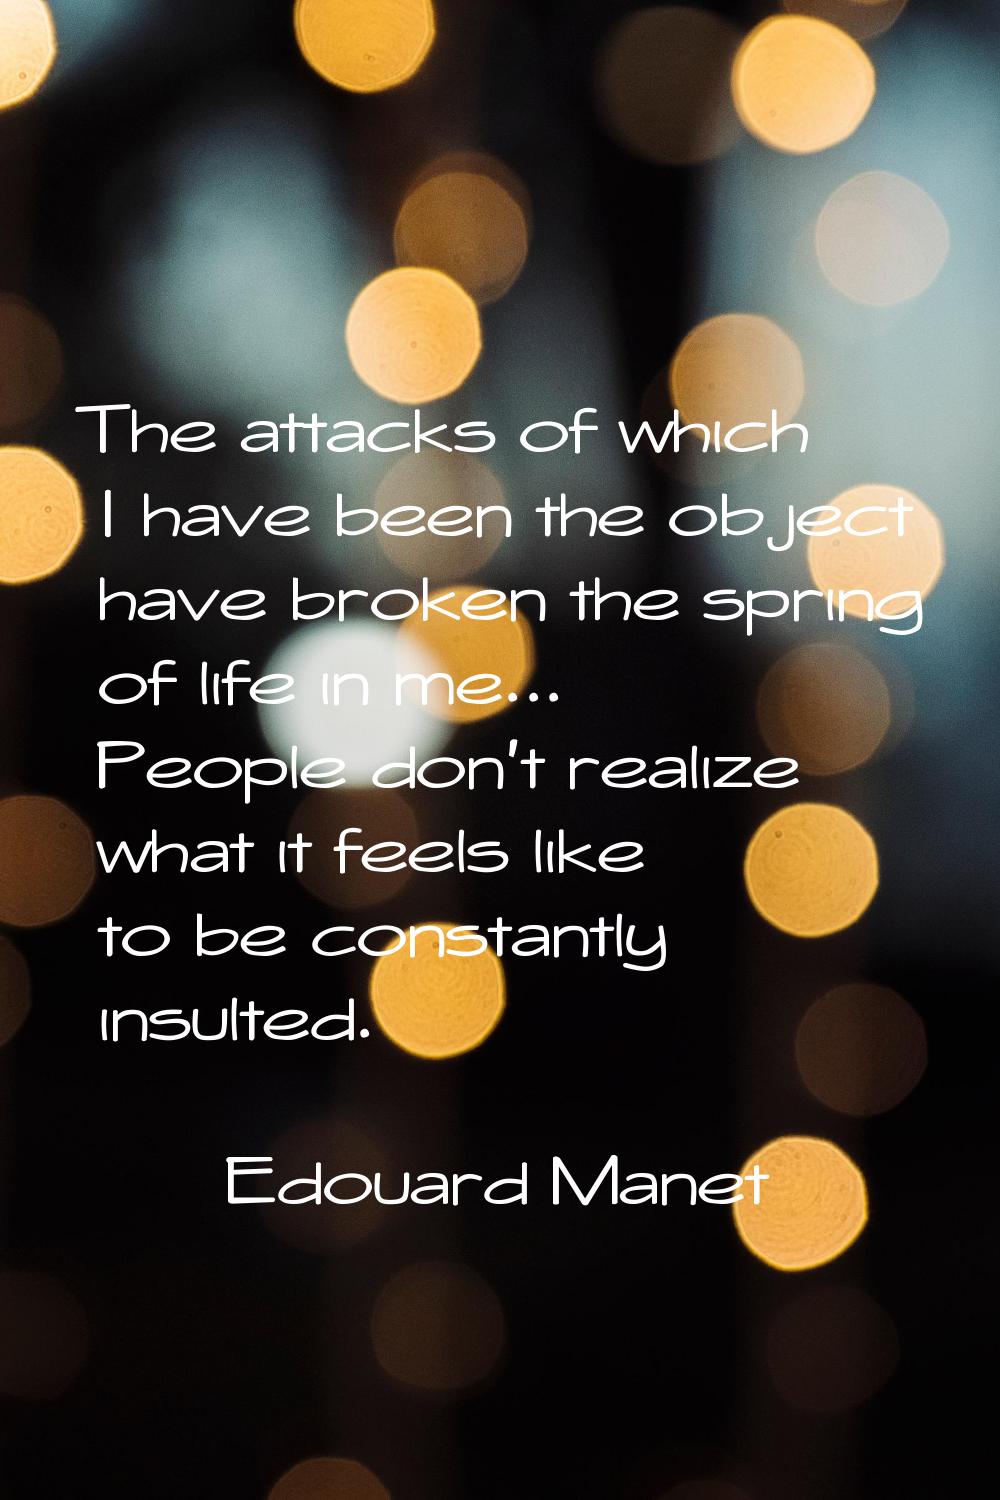 The attacks of which I have been the object have broken the spring of life in me... People don't re